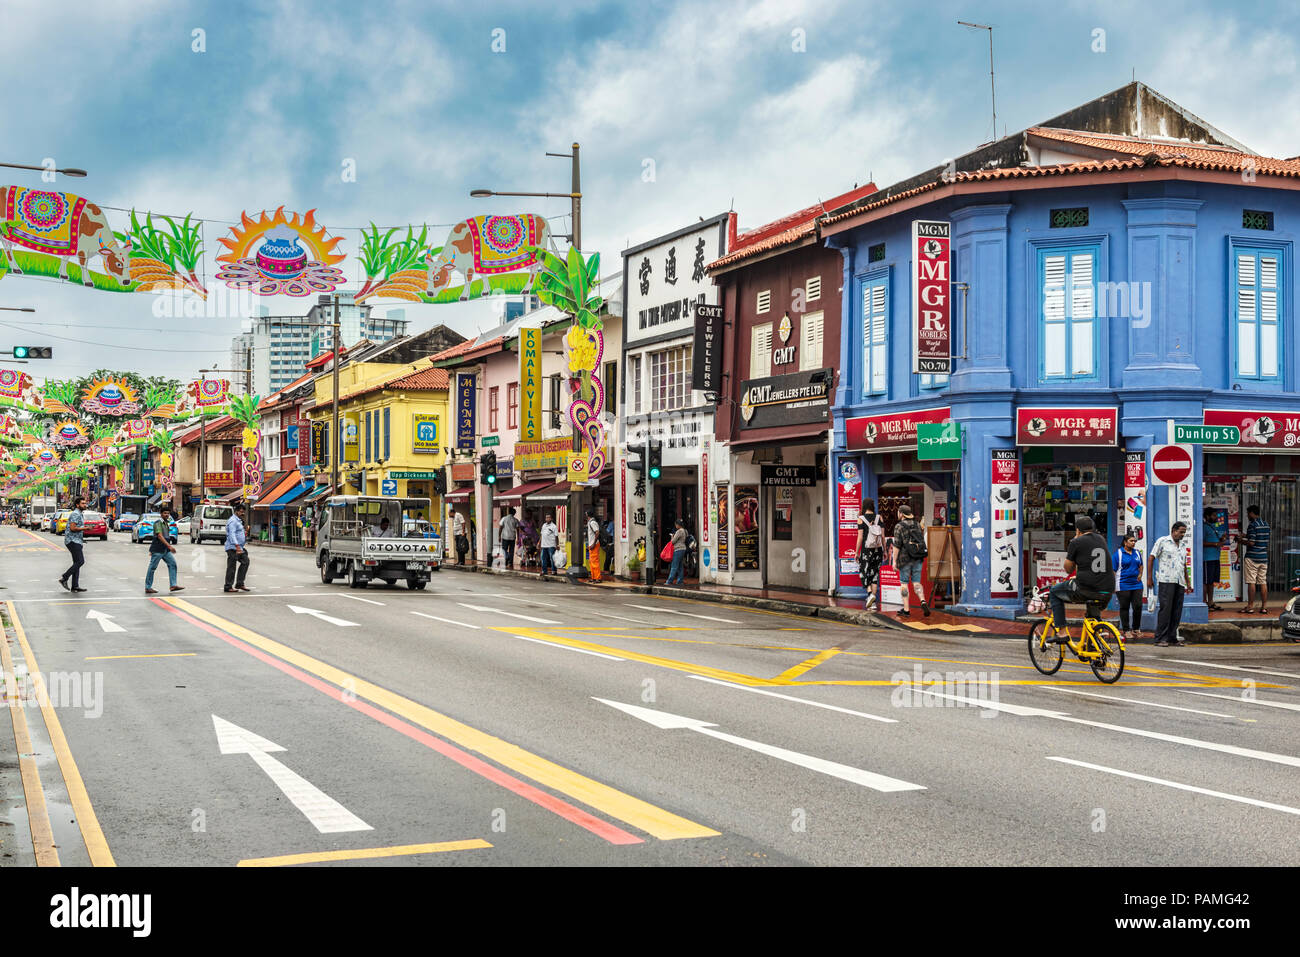 Singapore, January 12, 2018: Traffic on the street in the part of Singapore called Little India. Colorful old colonial houses and decoration over the  Stock Photo